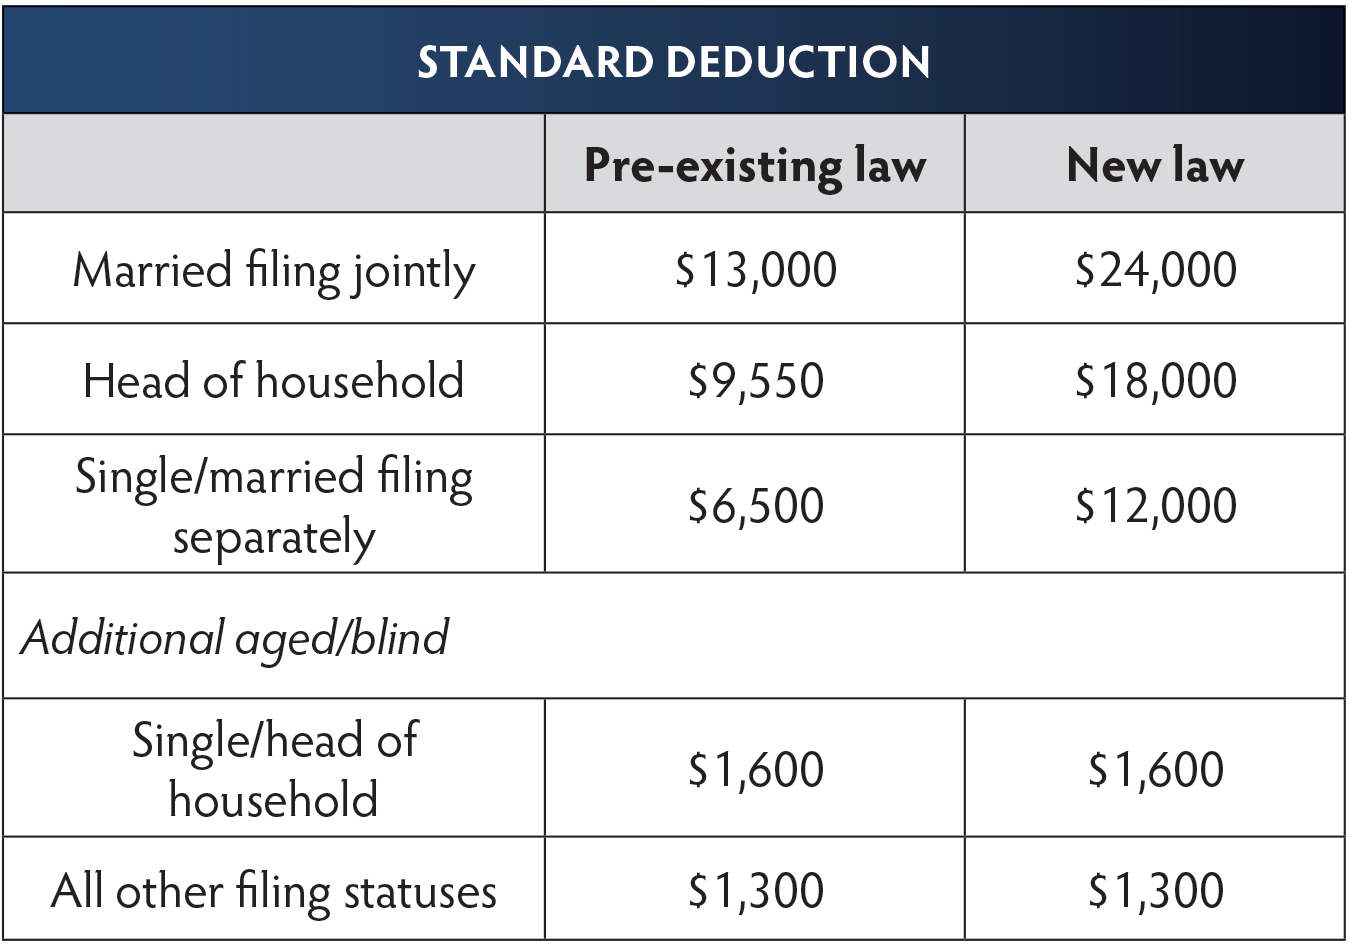 How The New Tax Law Is Different From Previous Policies